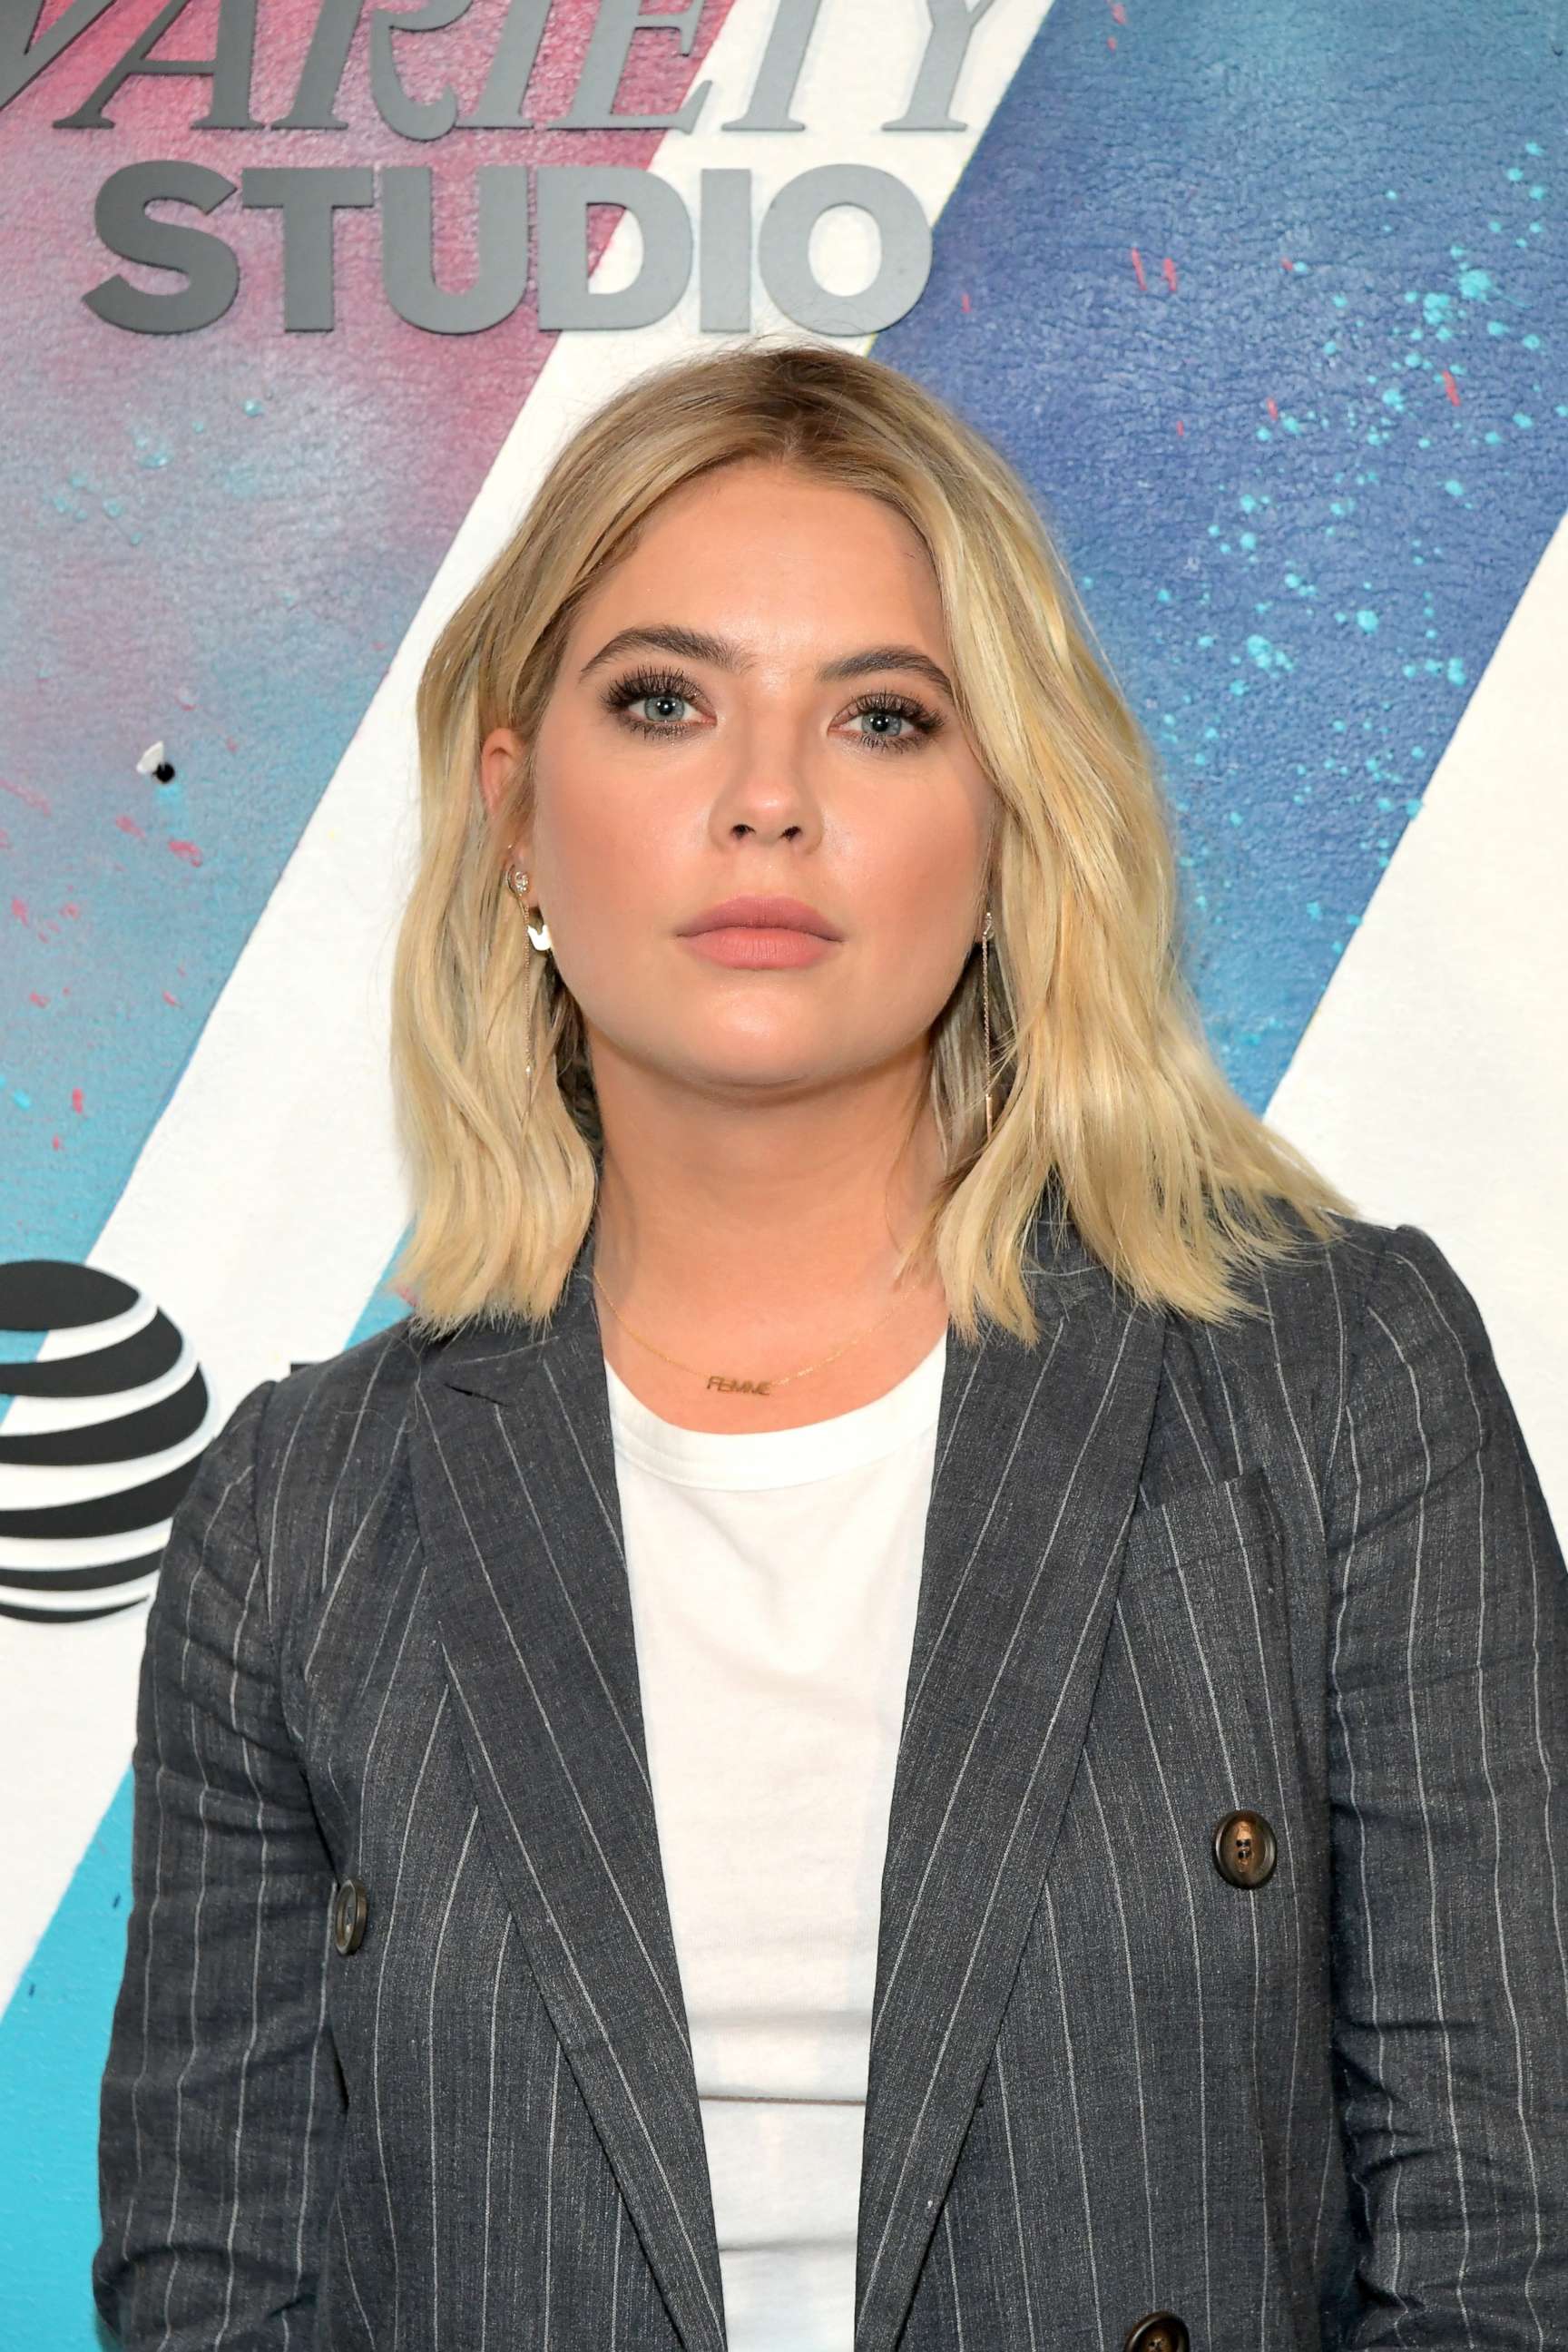 PHOTO: Ashley Benson attends an event during the Toronto International Film Festival on Sept. 9, 2018 in Toronto.